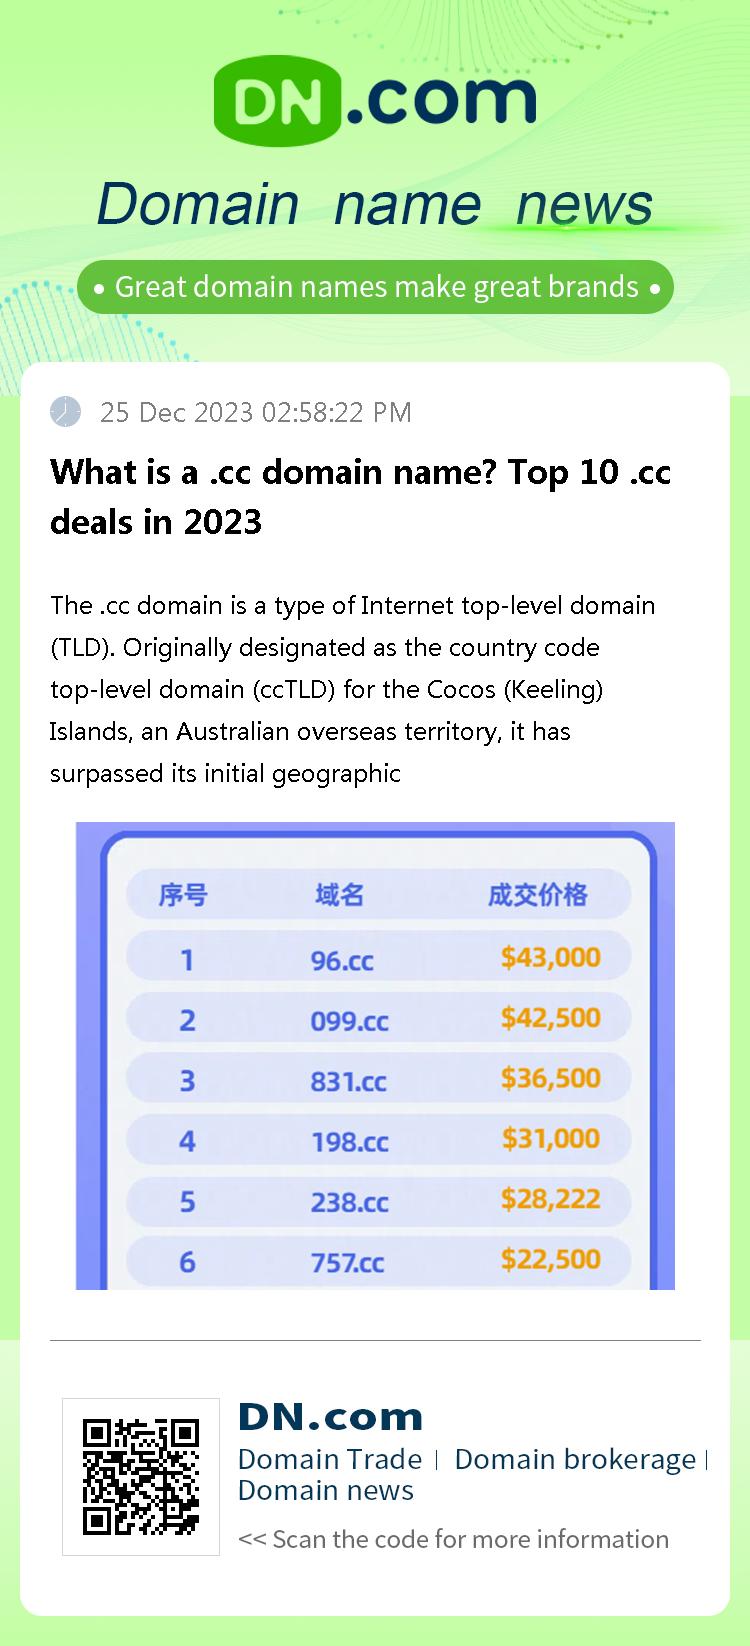 What is a .cc domain name? Top 10 .cc deals in 2023